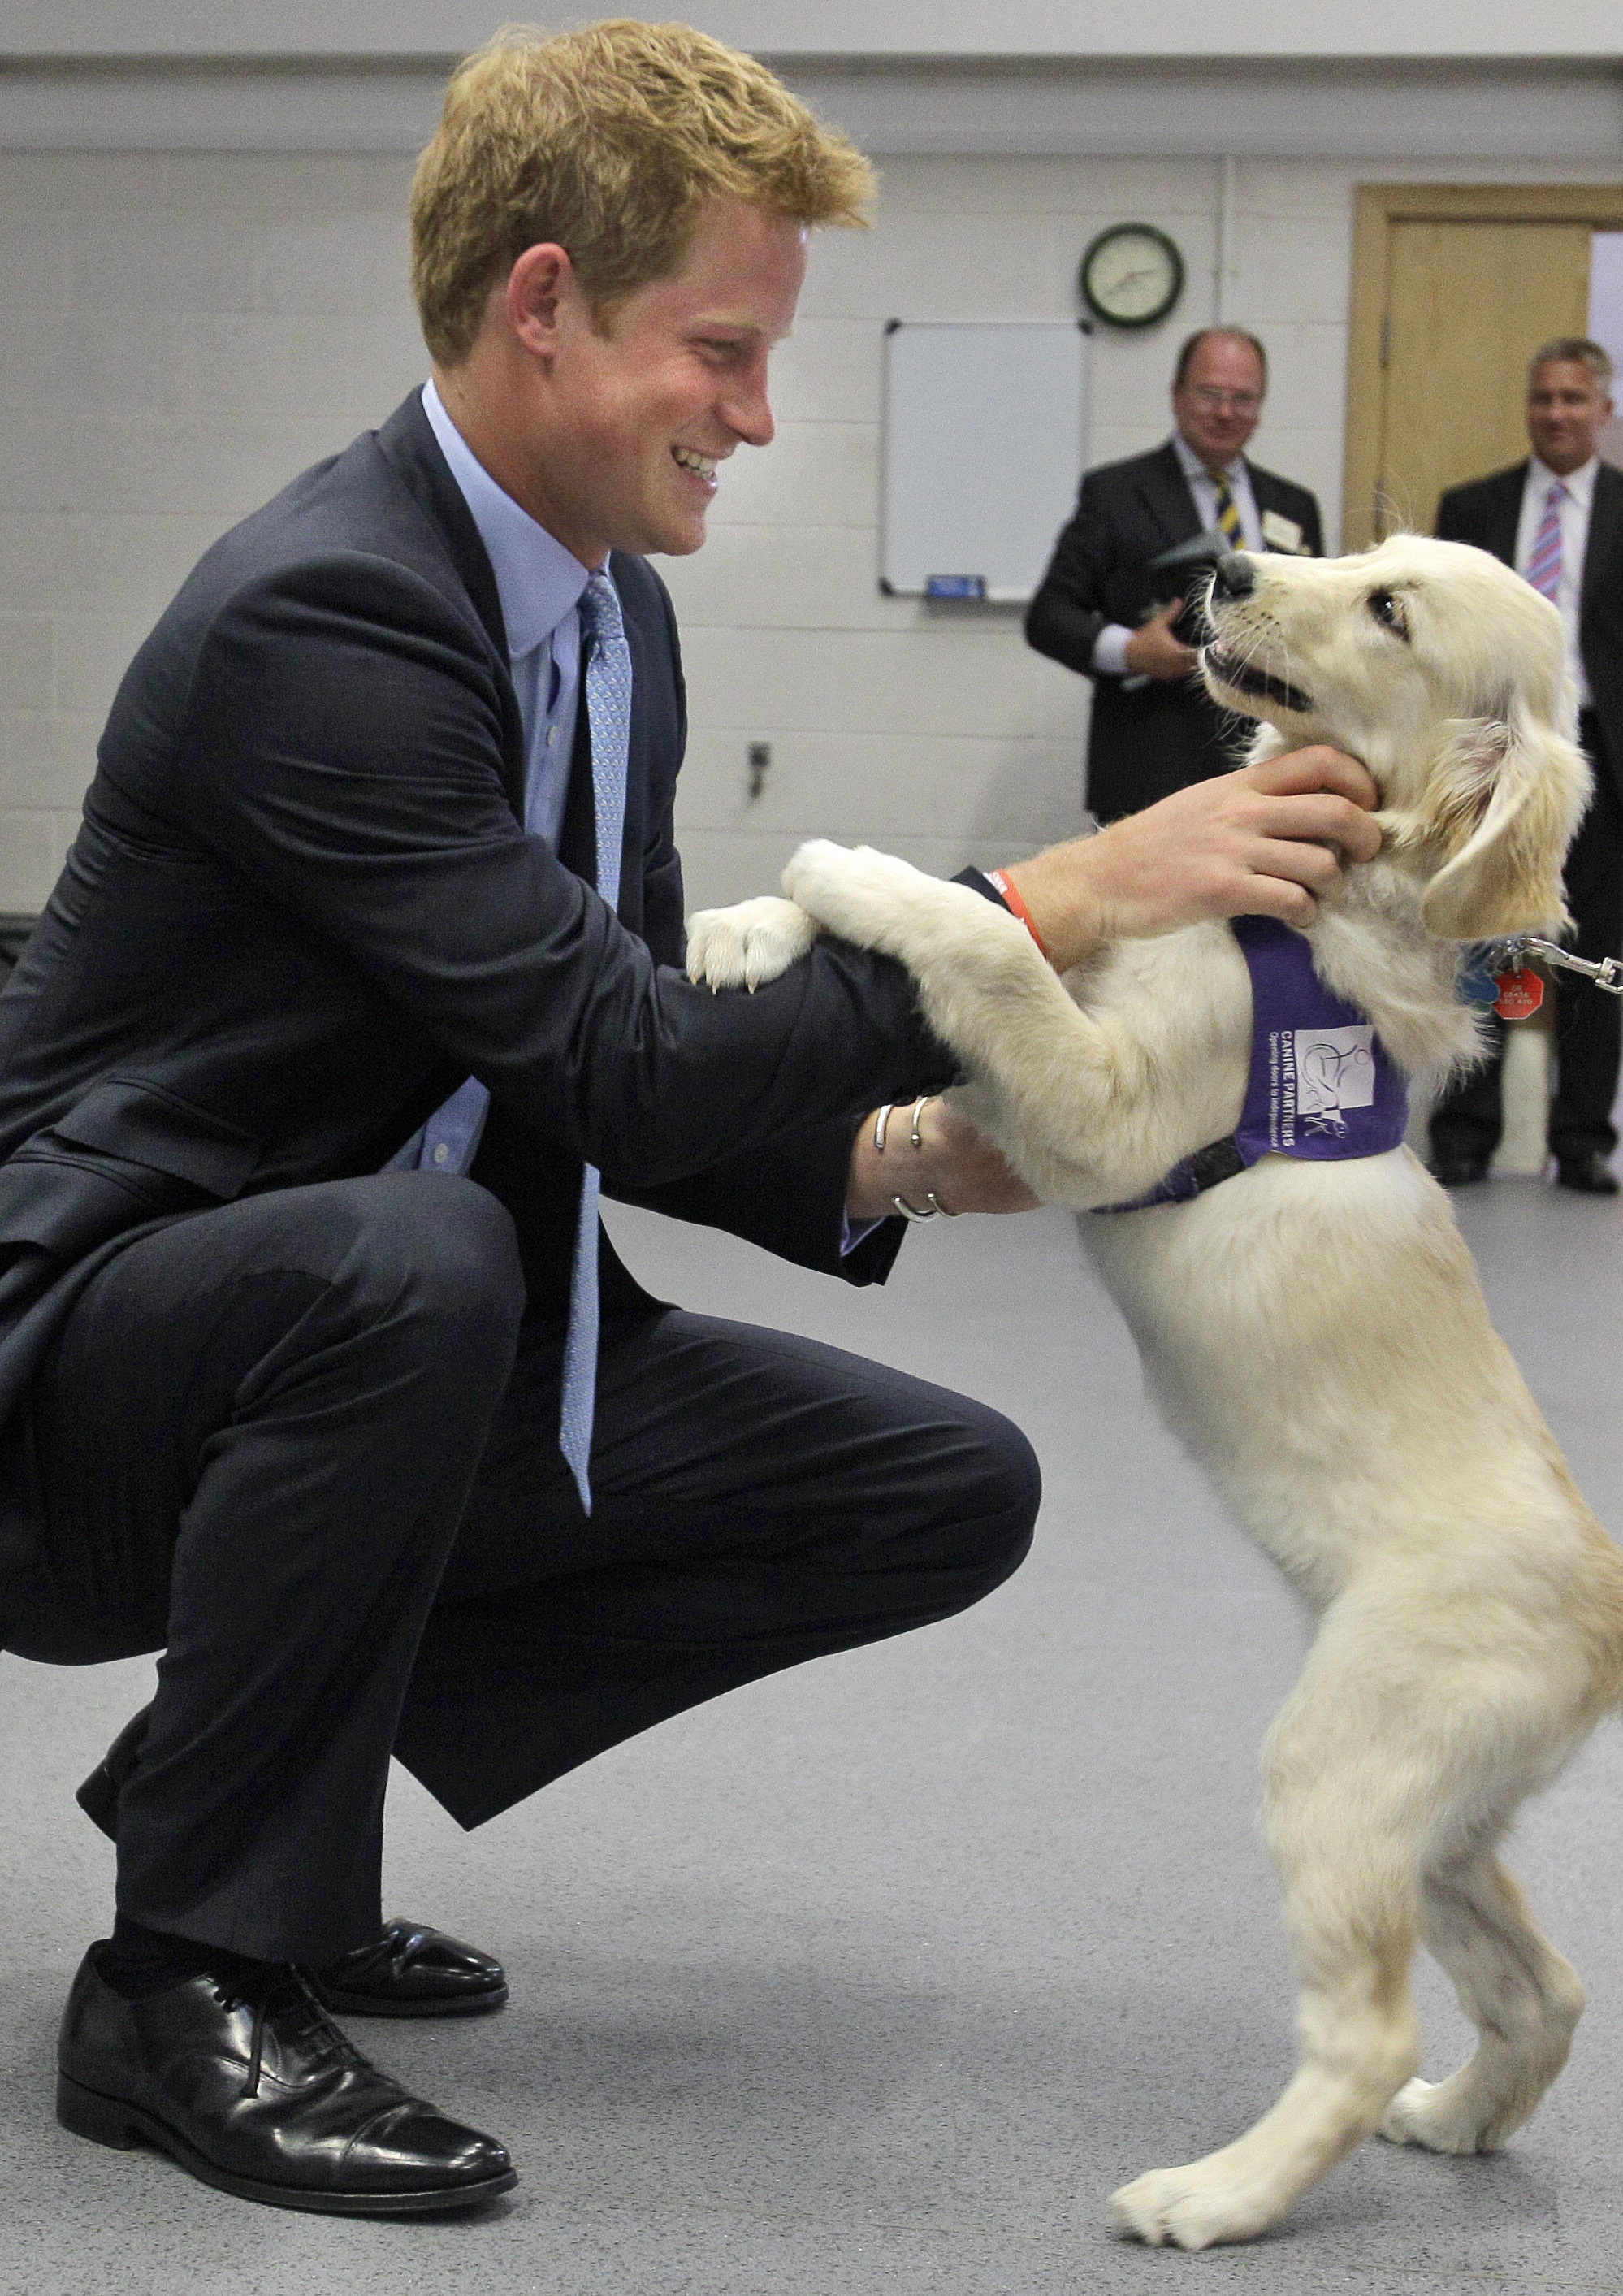 Prince Harry meets Trudy, a Golden Retriever puppy in 2010. | Source: Getty Images